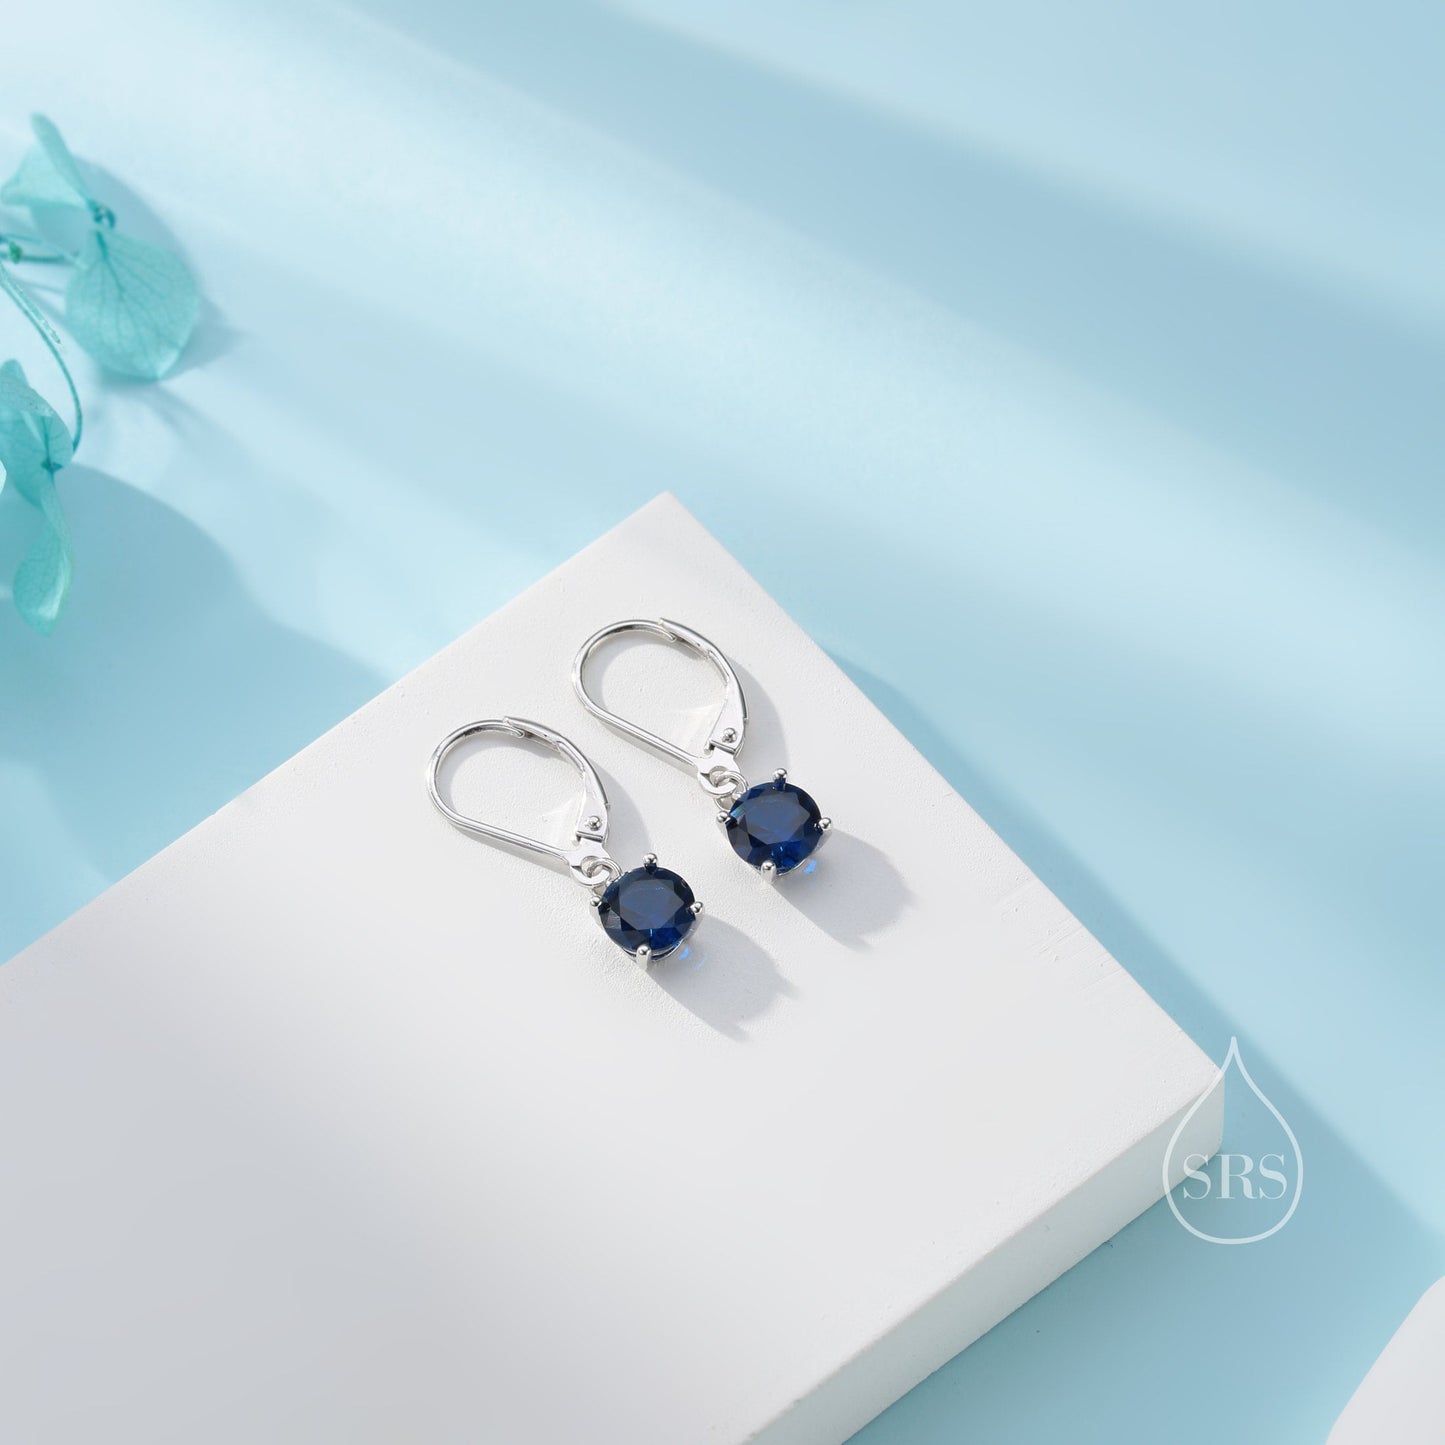 Sapphire Blue CZ Lever Back Hoop in Sterling Silver, 2 Sizes Available, 6mm or 6.5mm, Minimalist Simple Crystal Leverback Hoop Earrings